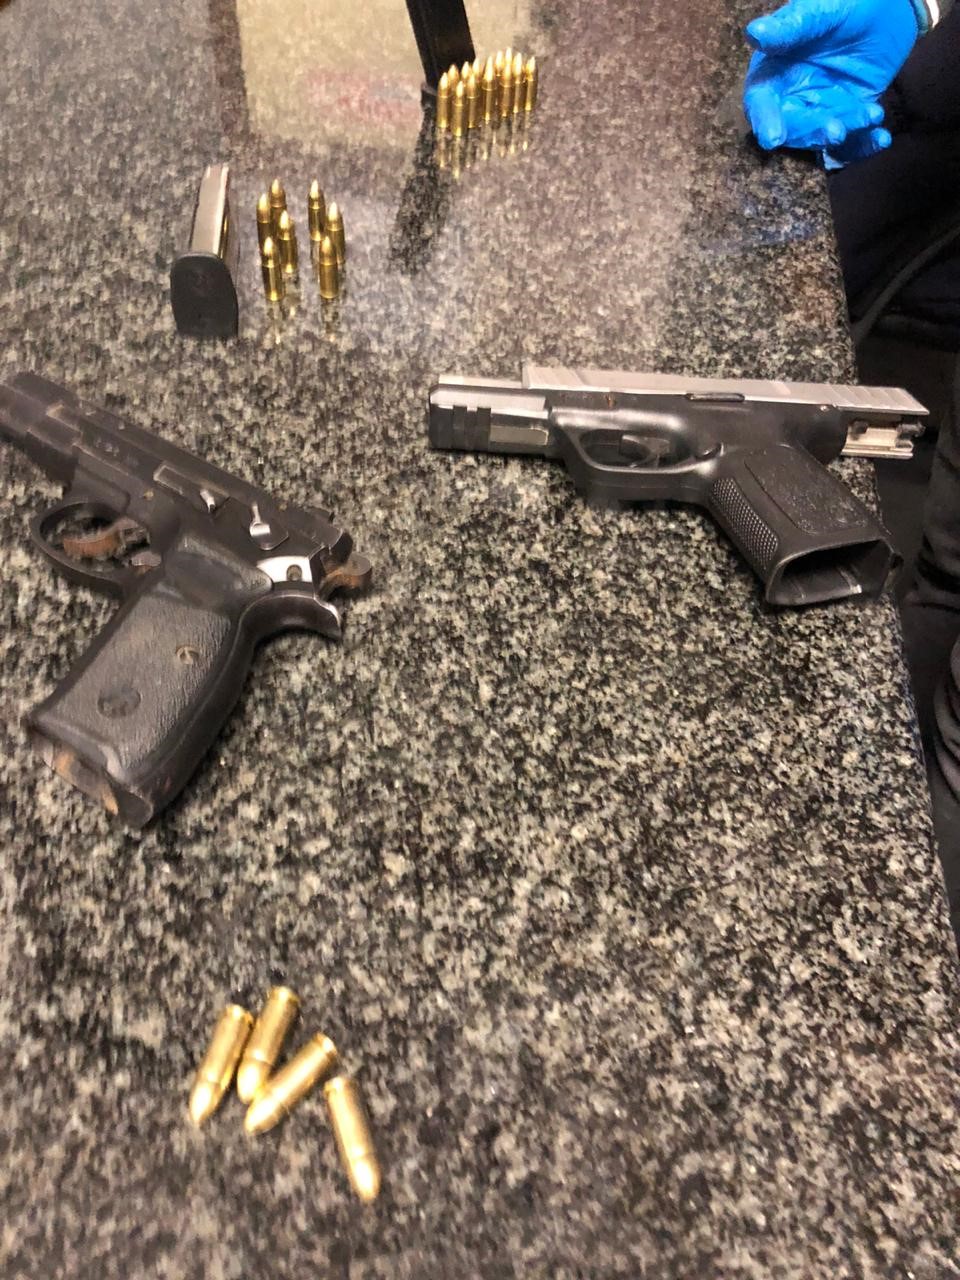 Three men bust with firearms in Durban